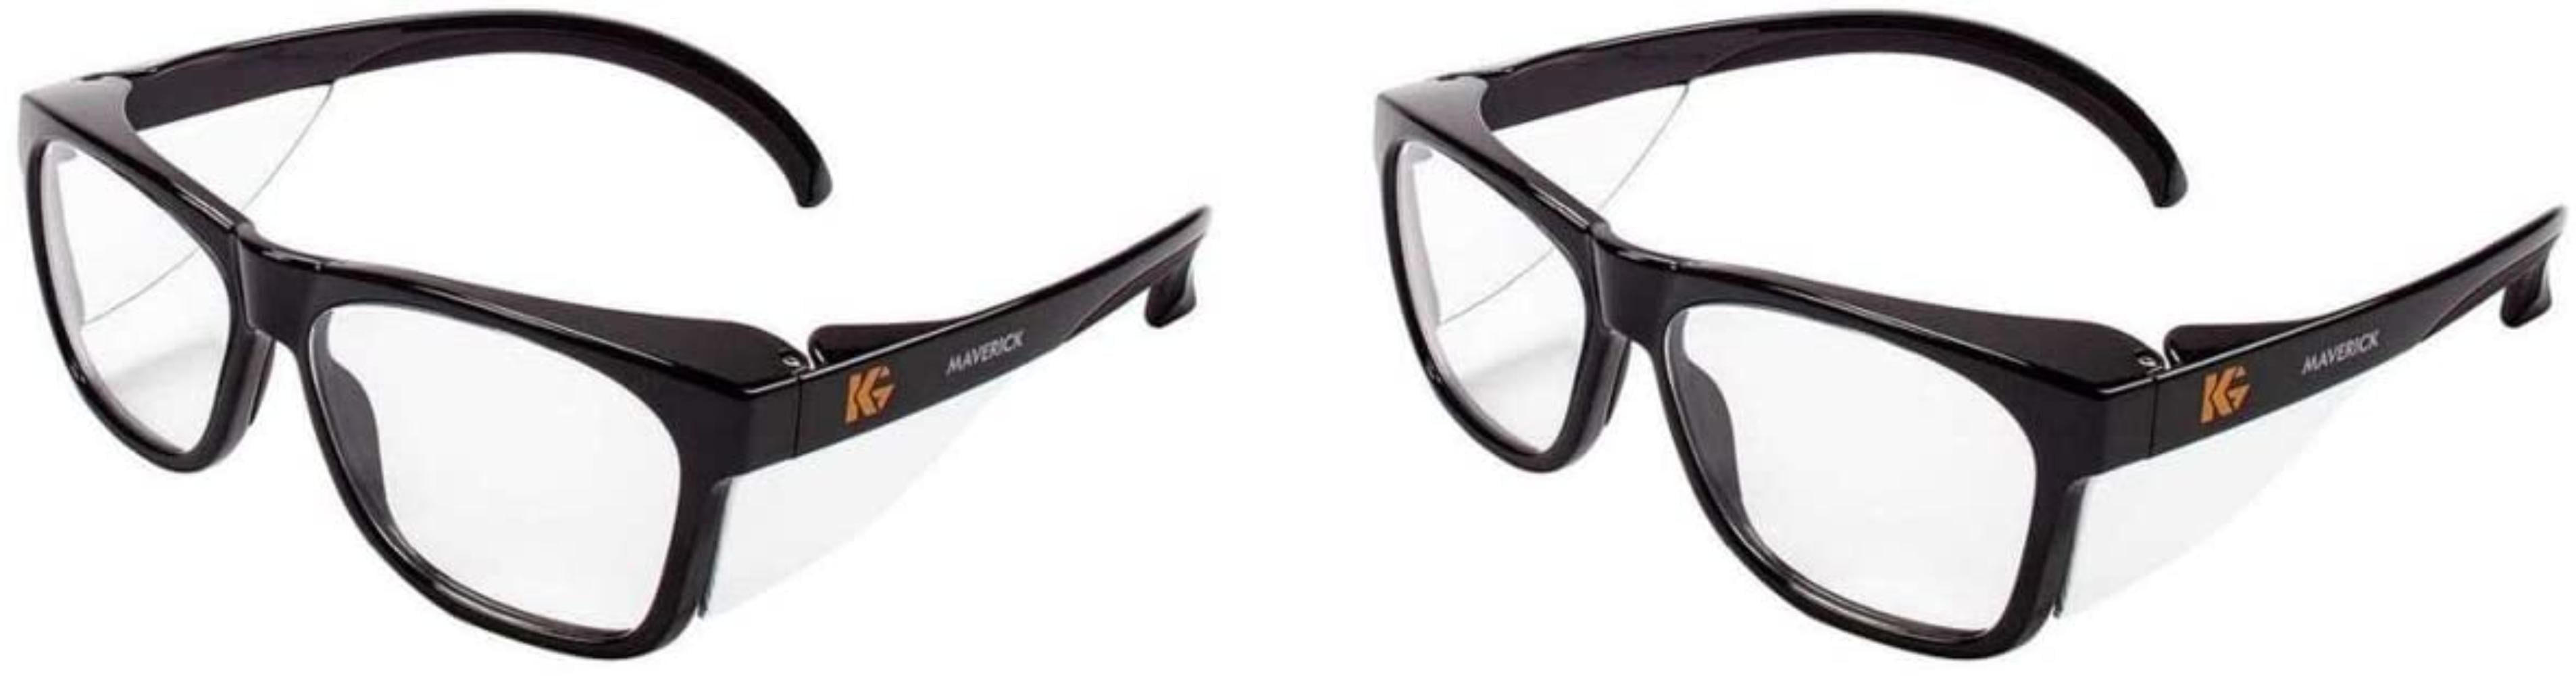 KleenGuard Maverick Safety Glasses With Intergrated Side Shields 1 Pair 49301 for sale online 